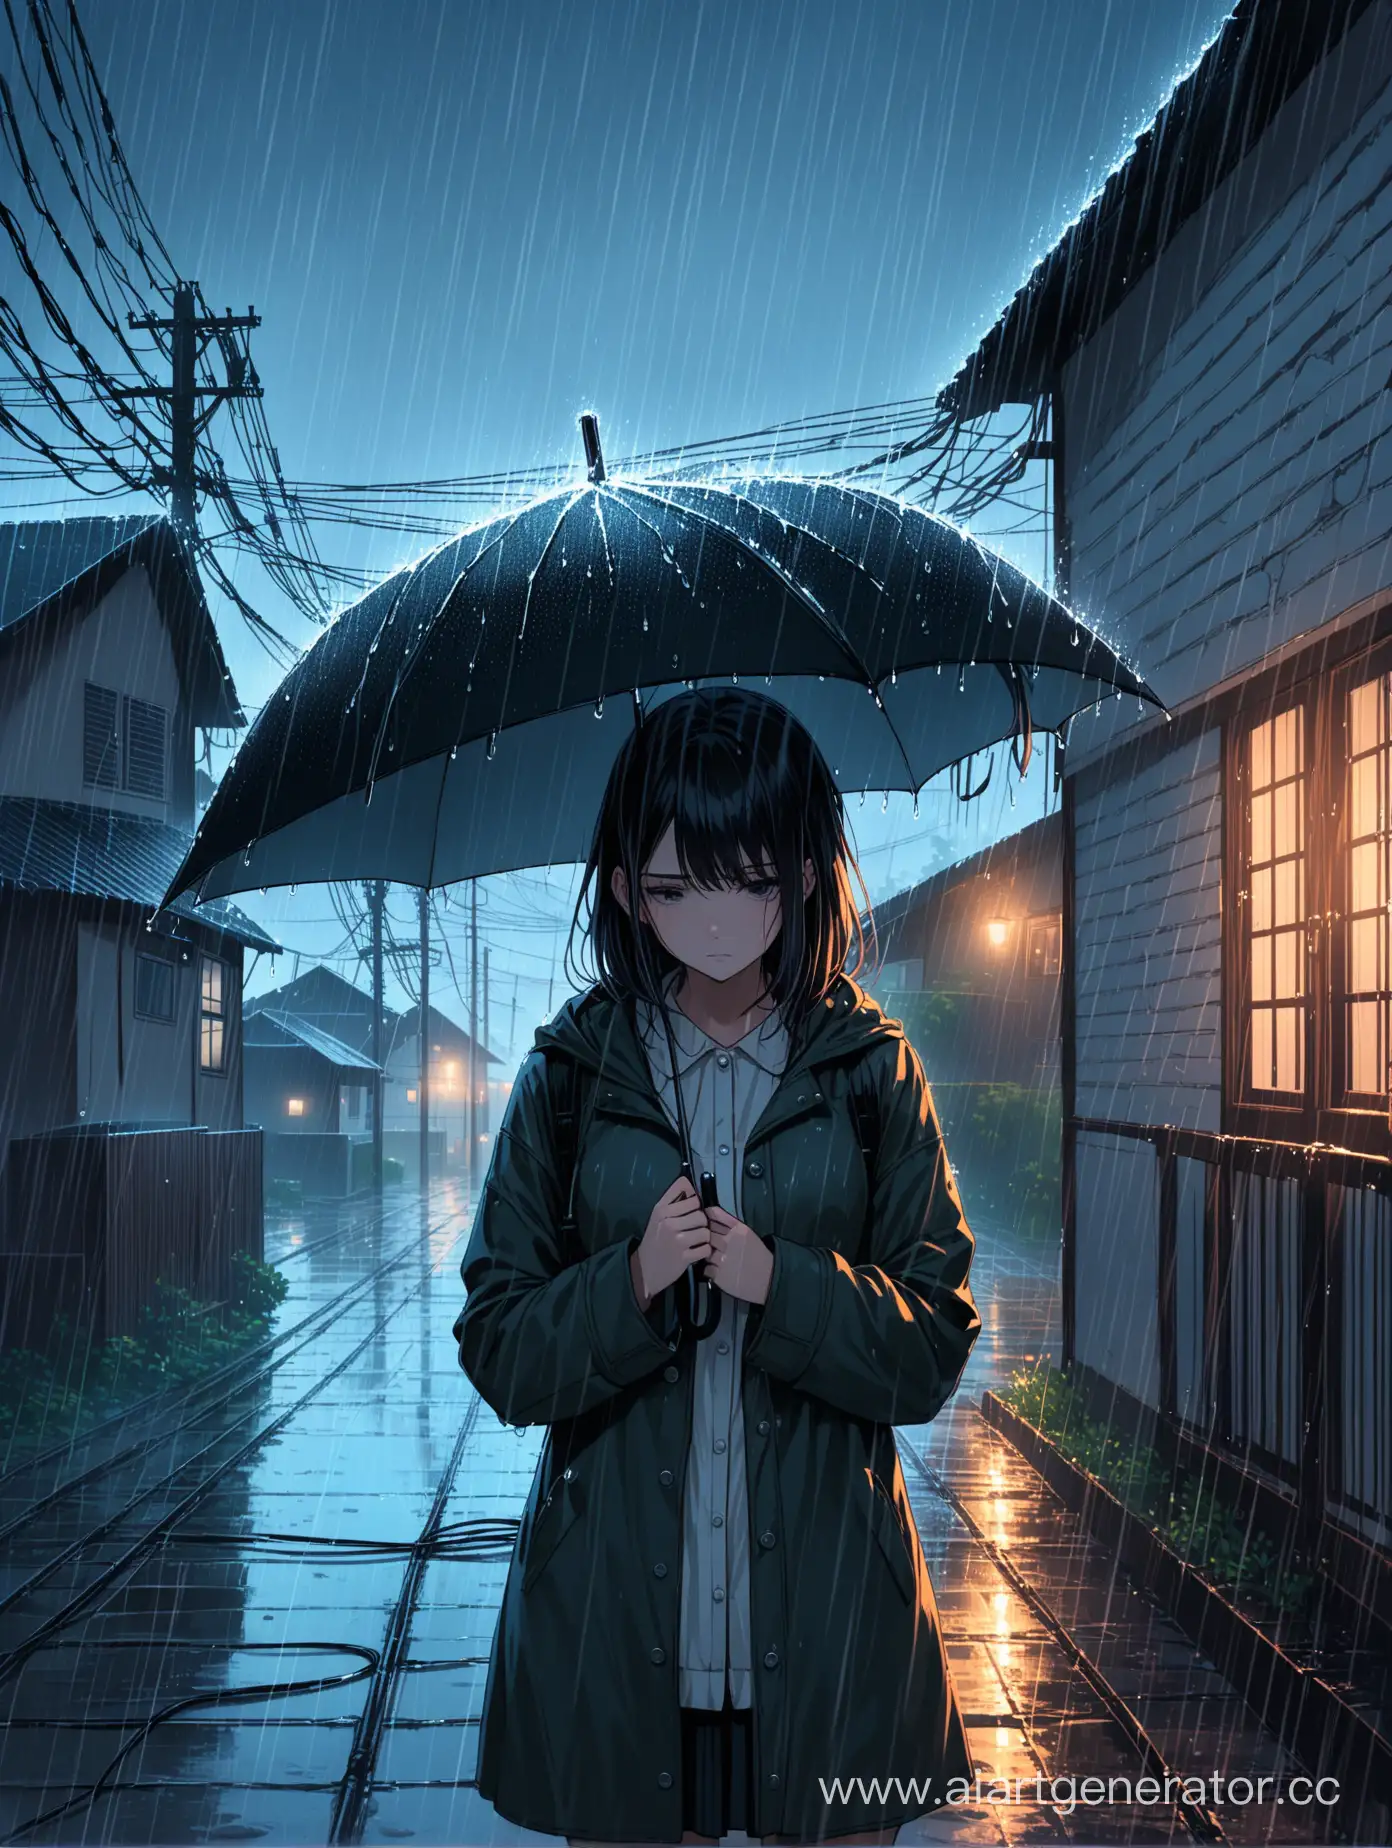 Lonely-Girl-with-Umbrella-in-Rainy-Heart-House-Scene